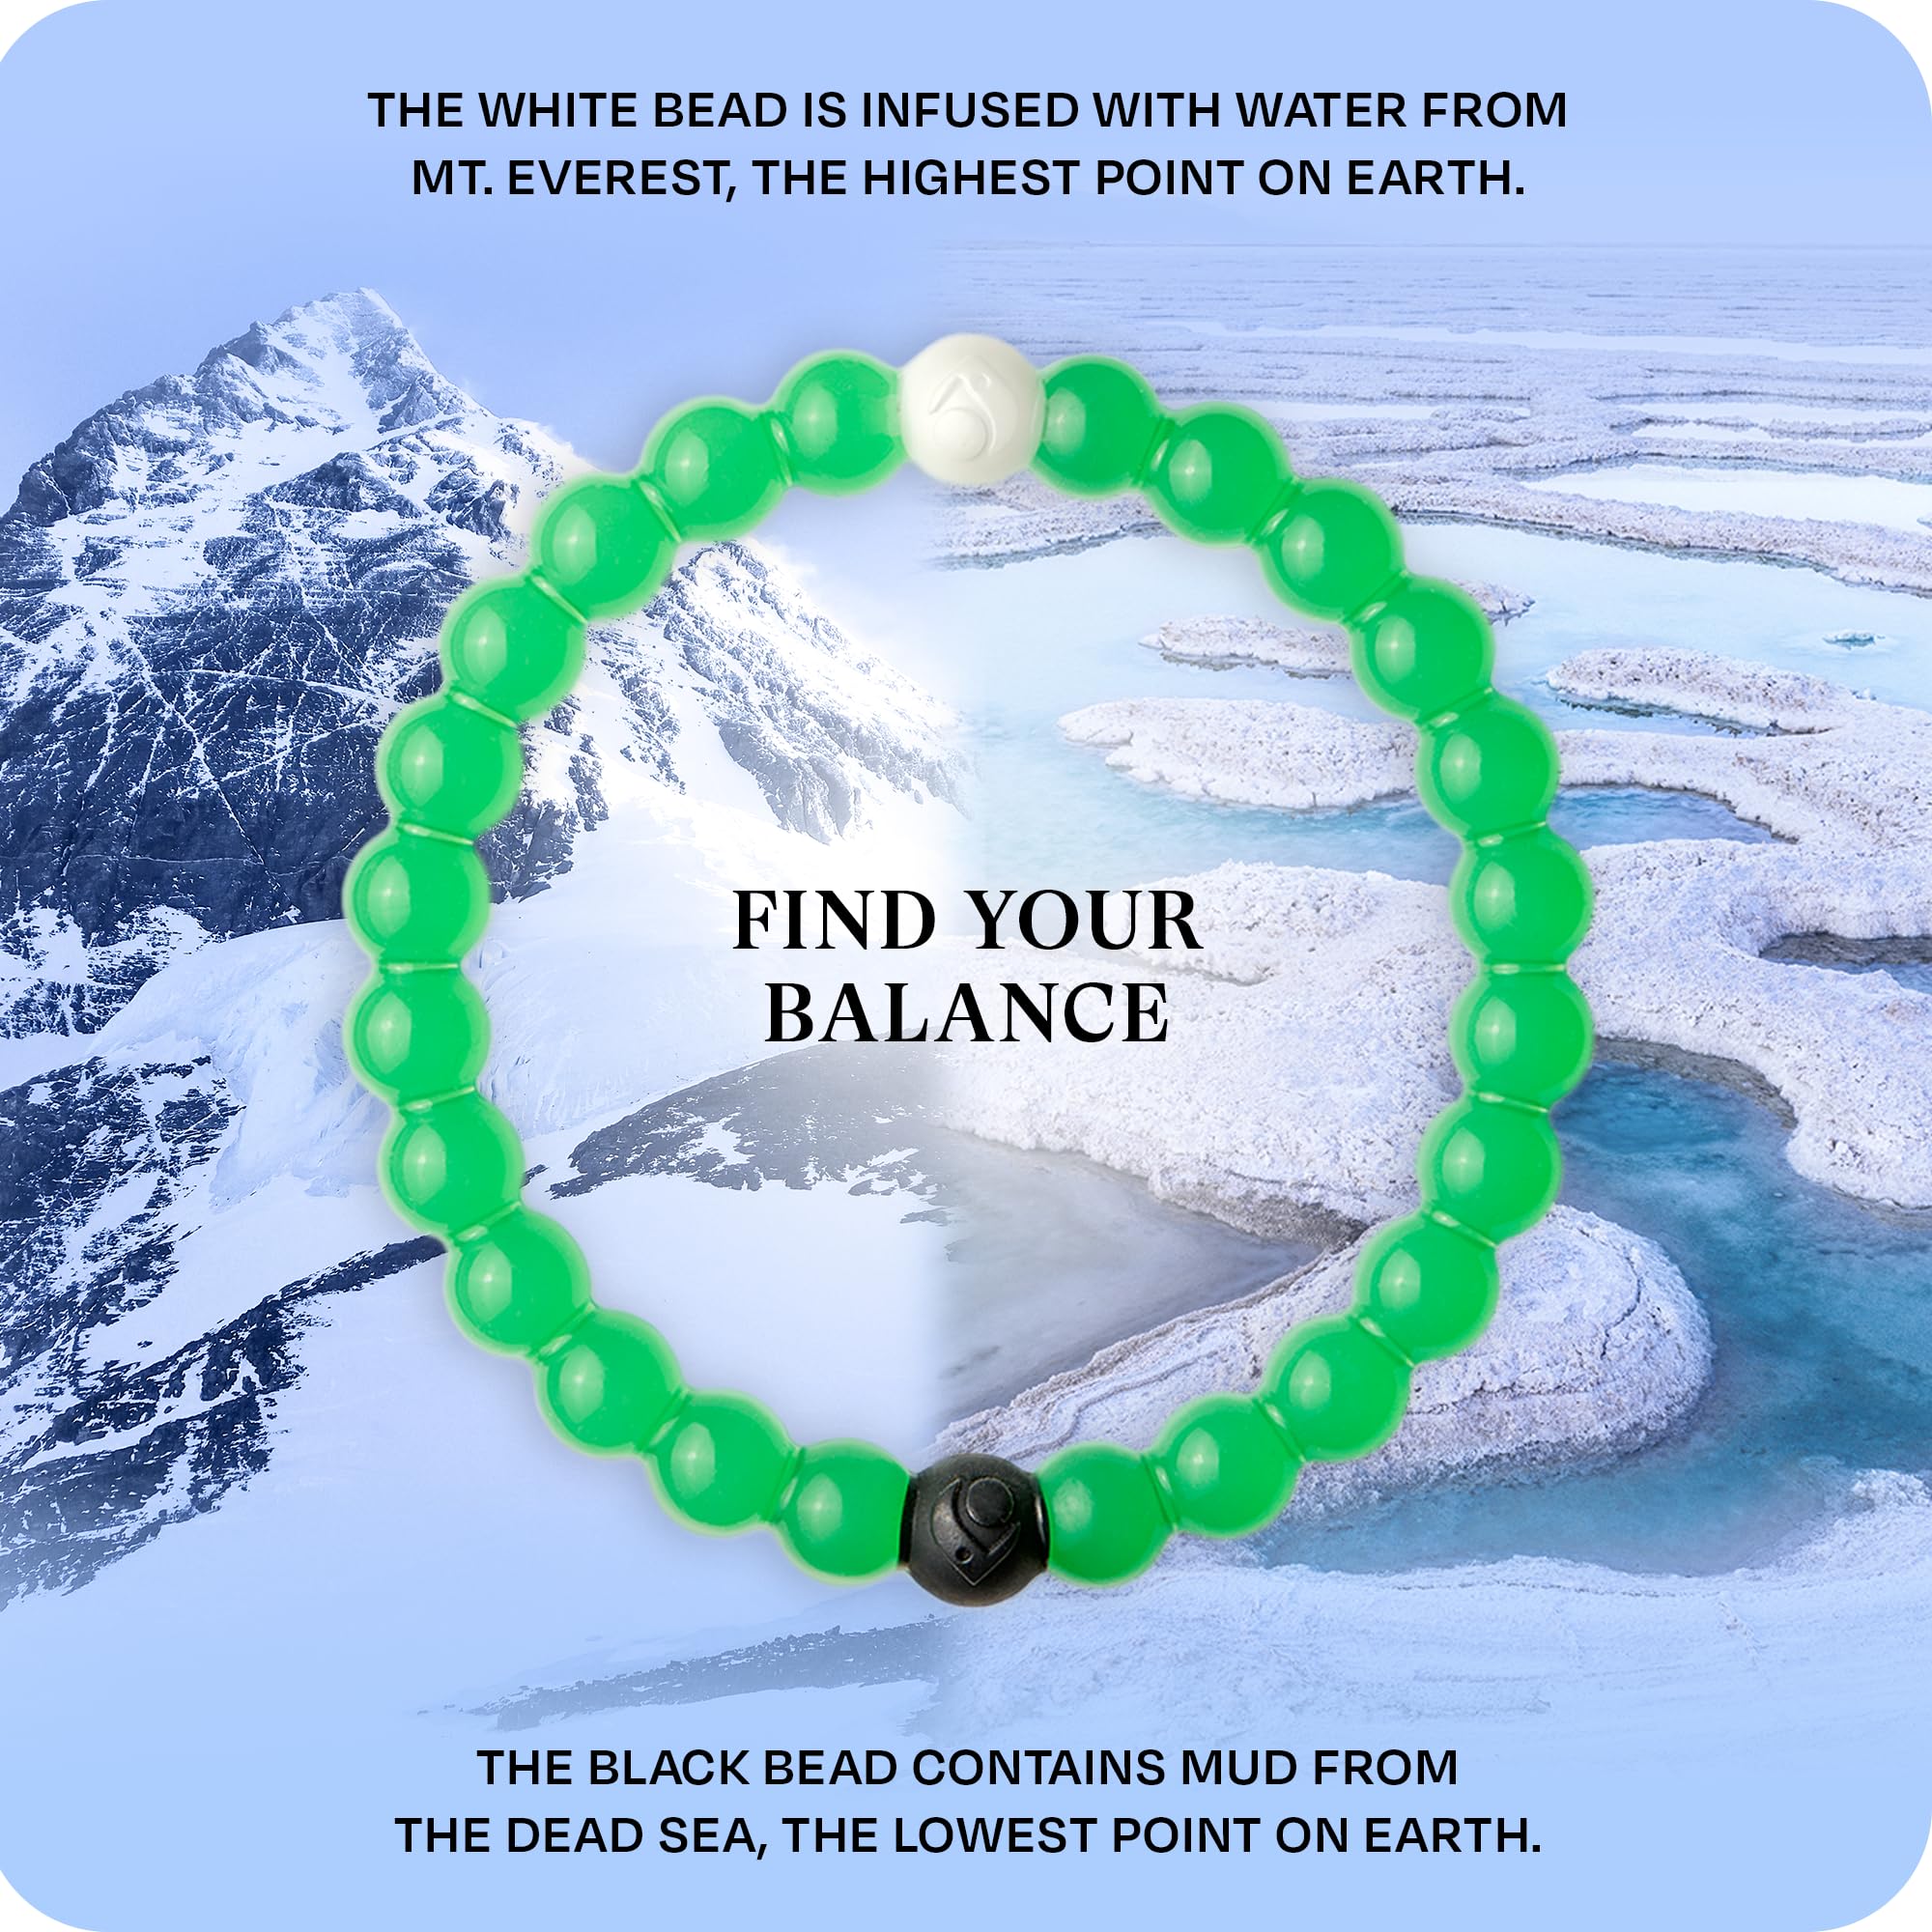 Lokai Silicone Beaded Bracelet for Environment Cause - Medium, 6.5 Inch Circumference - Jewelry Fashion Bracelet Slides-On for Comfortable Fit for Men, Women & Kids